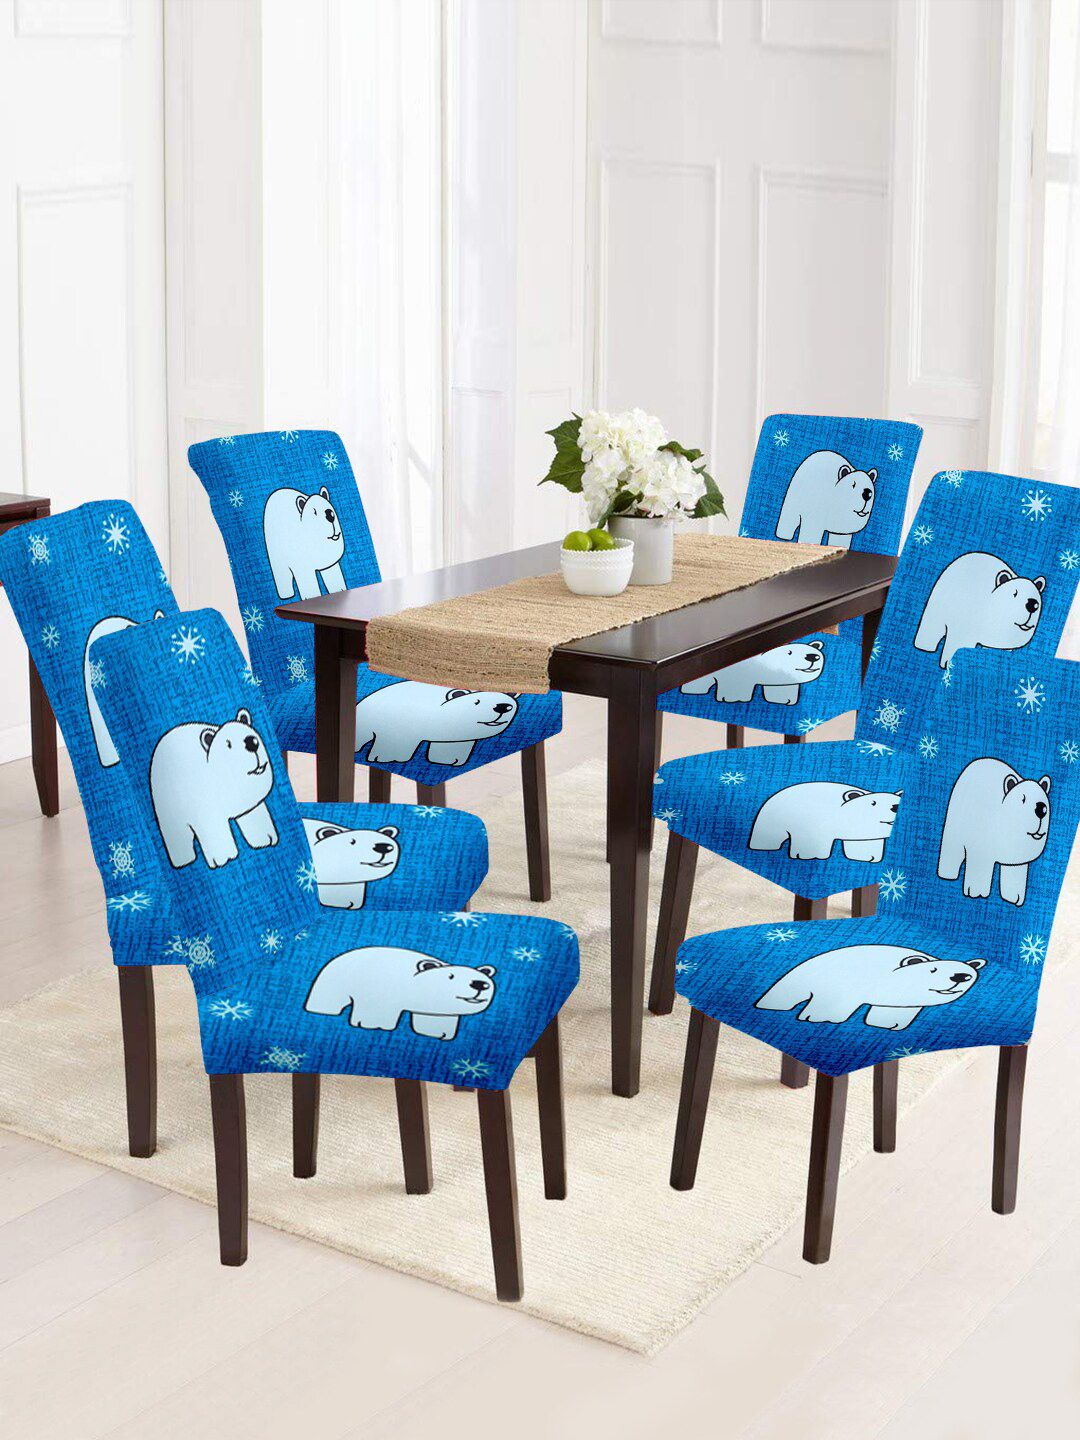 Aura Set Of 6 Blue Printed Chair Covers Price in India